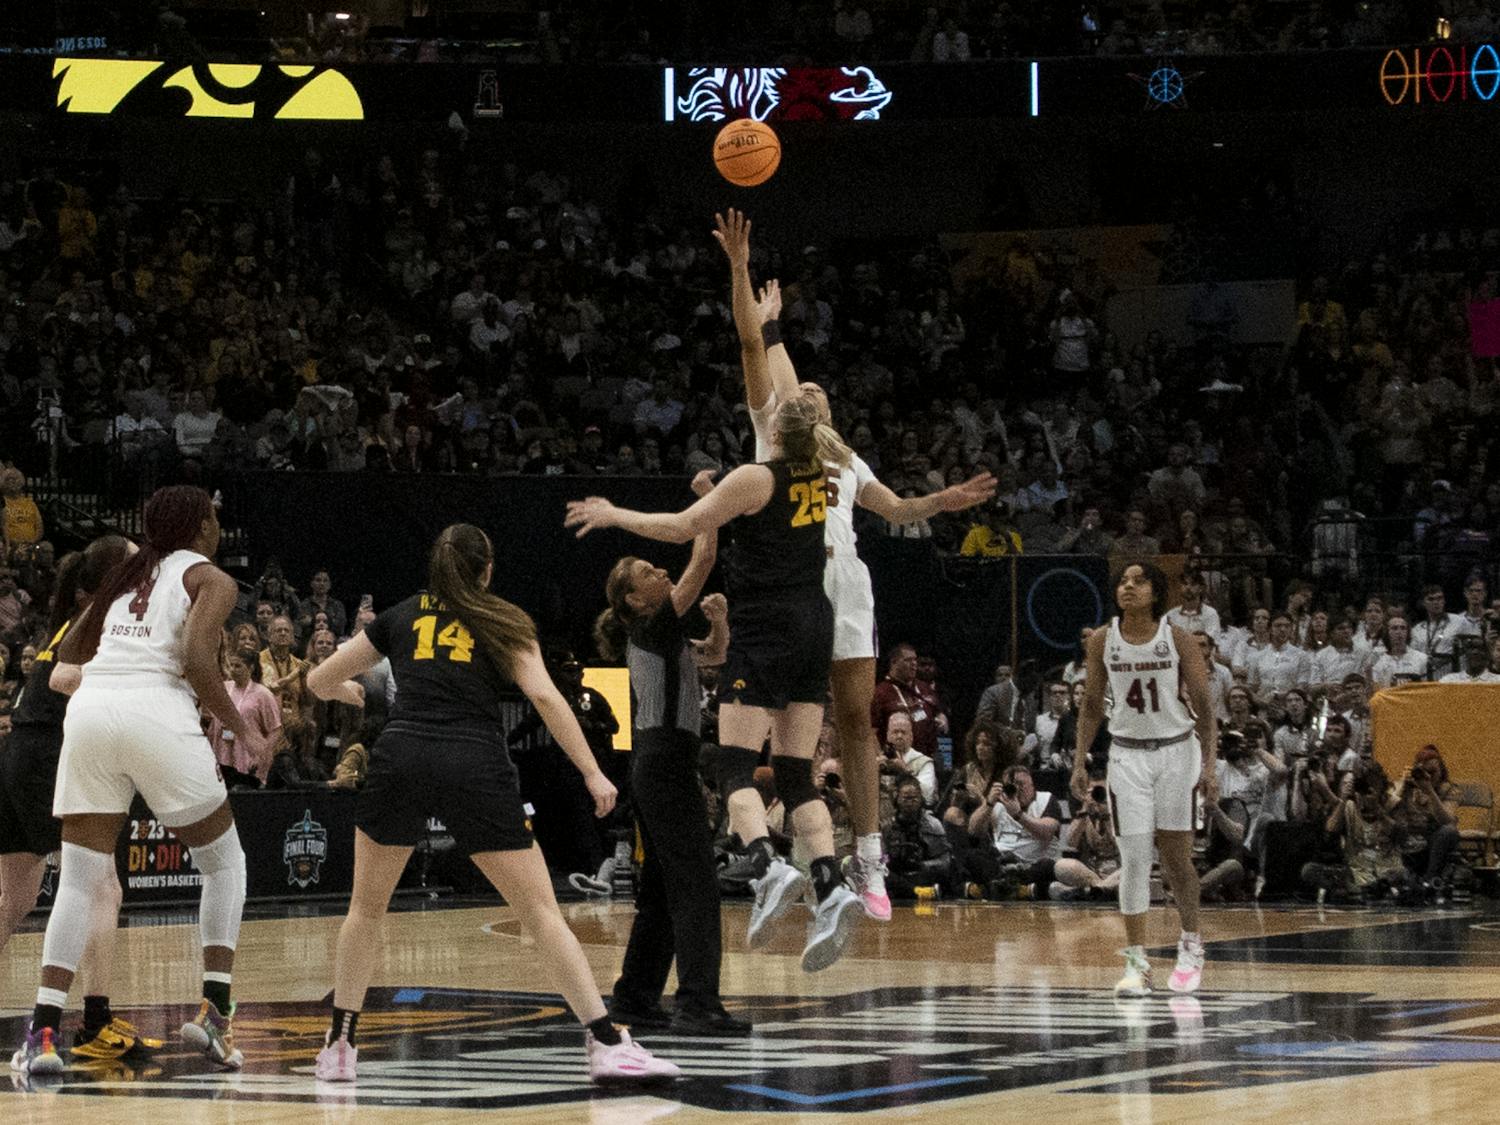 Senior forward Victaria Saxton wins the tip-off against the University of Iowa at the start of the Final Four match on March 31, 2023. Senior guard Zia Cooke, senior forward Aliyah Boston, senior guard Brea Beal, graduate student guard Kierra Fletcher and Saxton made up the starting five for the Gamecocks.